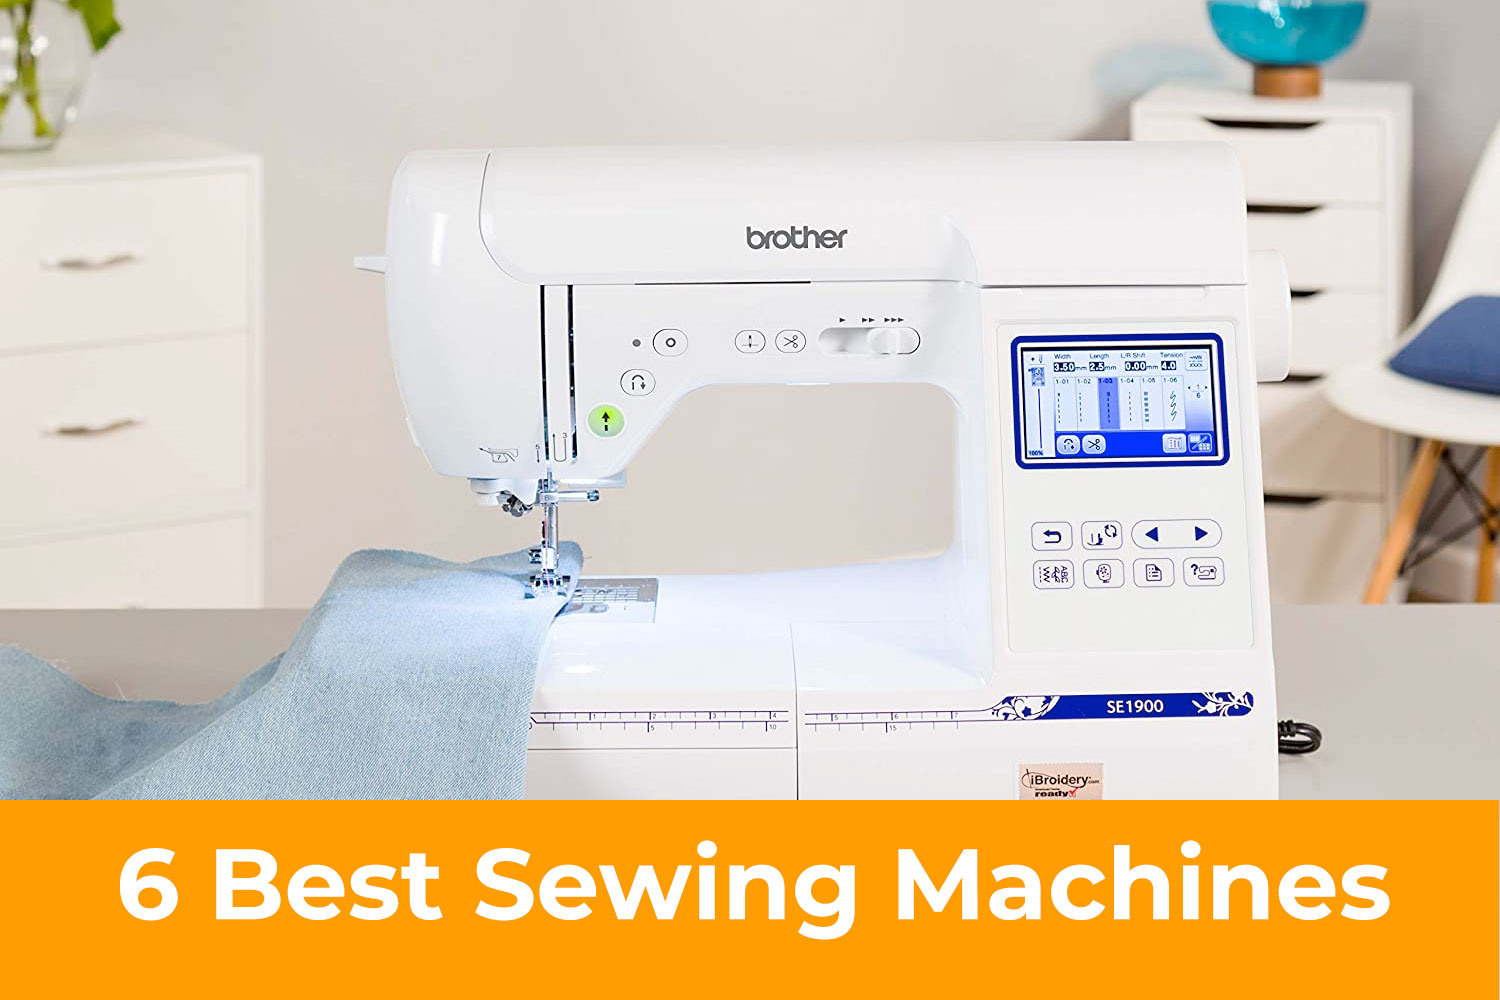 Check These 6 Best Sewing Machines Including Embroidery Machines